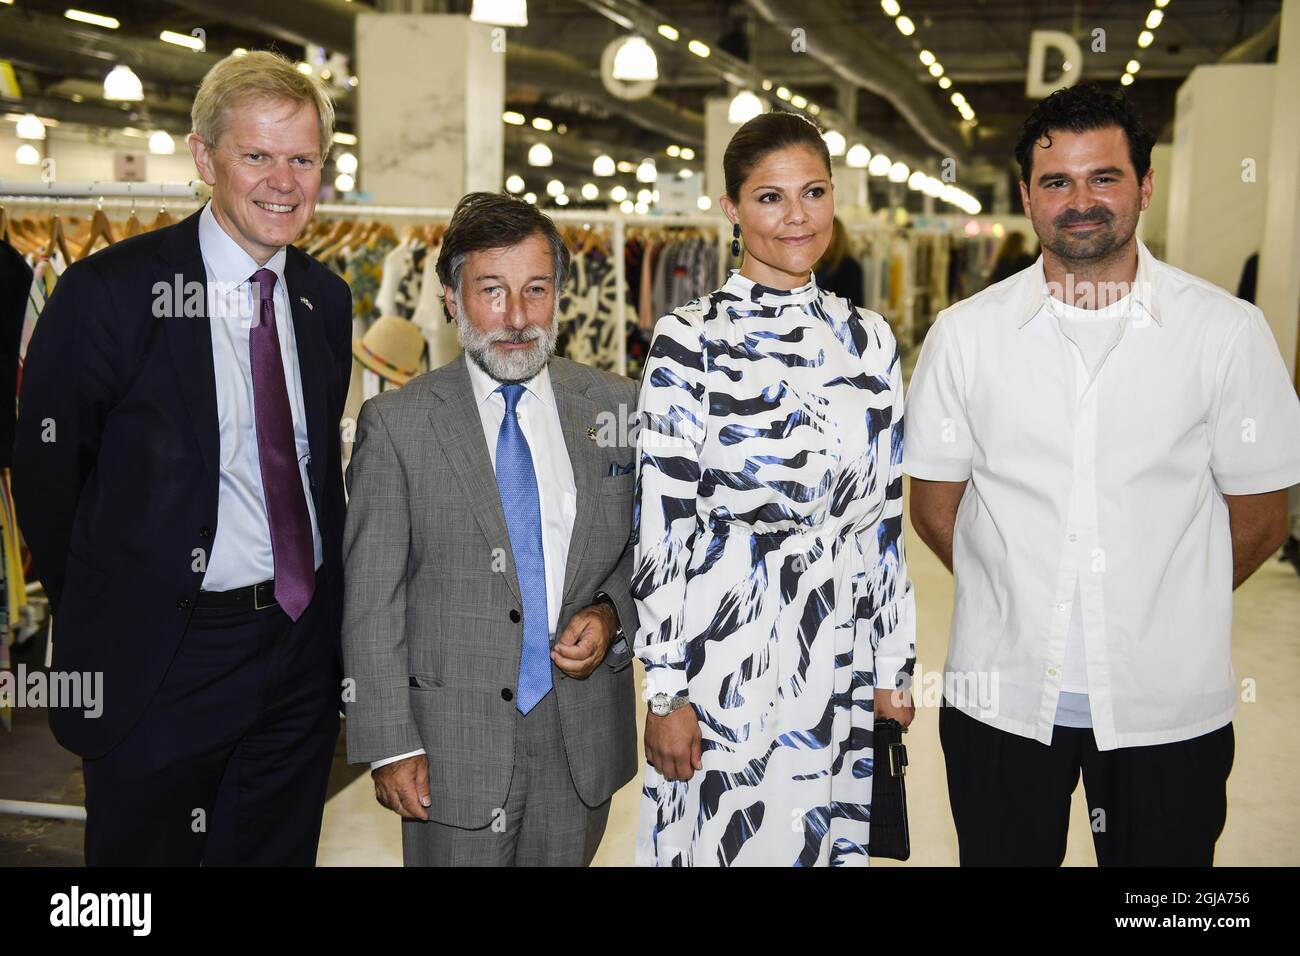 NEW YORK 20160918 Sweden's Crown Princess Victoria visits Capsule Fashion Trade Show in New York together with with Bjorn Lyrvall, Sweden's ambassador to the United States and Leif Pagrotsky, Sweden's consul general in New York, and to the right Chris Corrado, Capsule Show Director. Photo: Pontus Lundahl / TT / kod 10050  Stock Photo